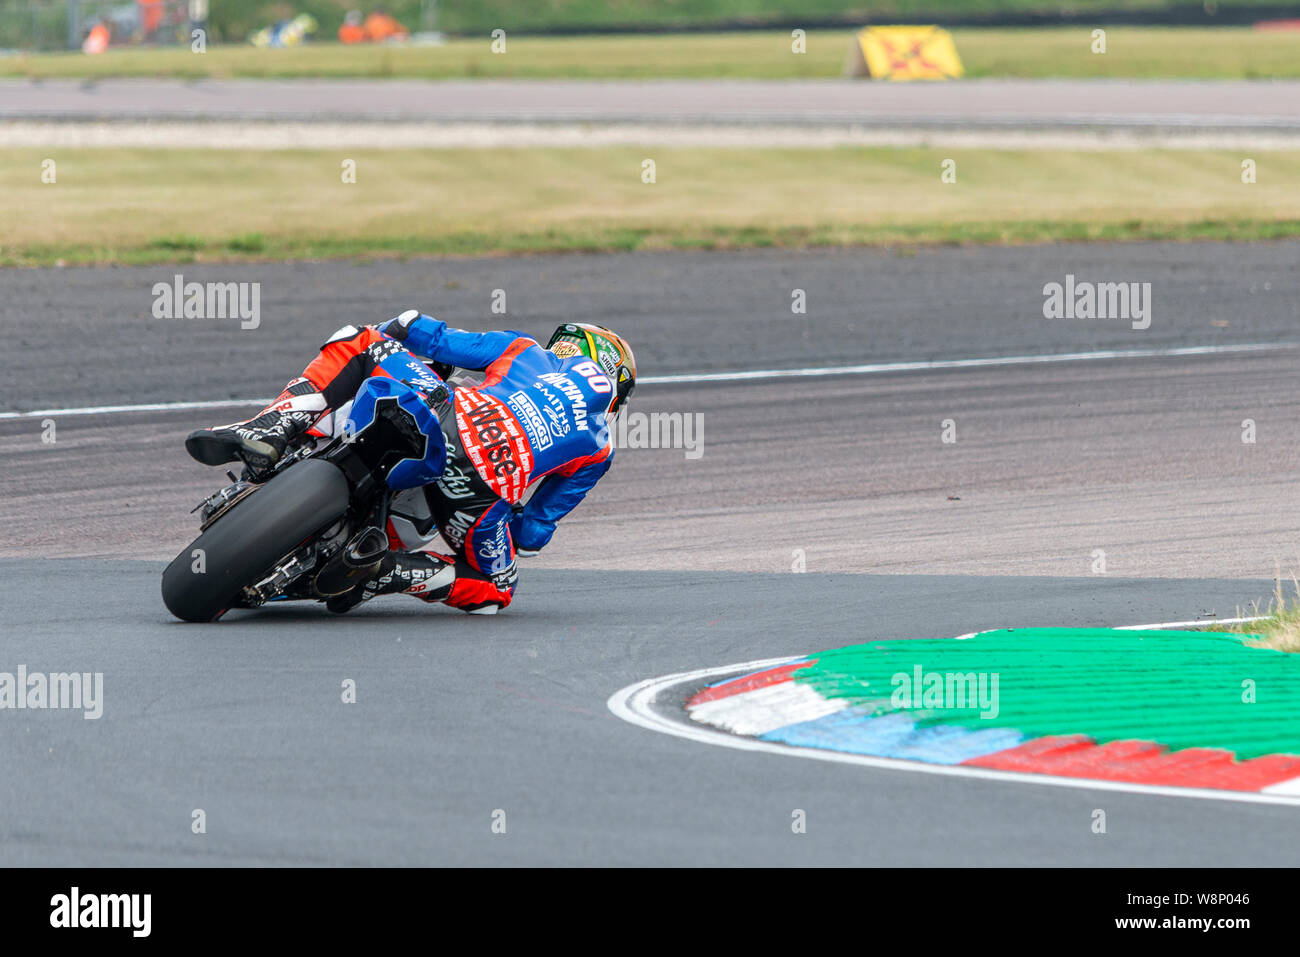 Peter Hickman 'Hicky' cornering on his superbike at Thruxton Stock Photo